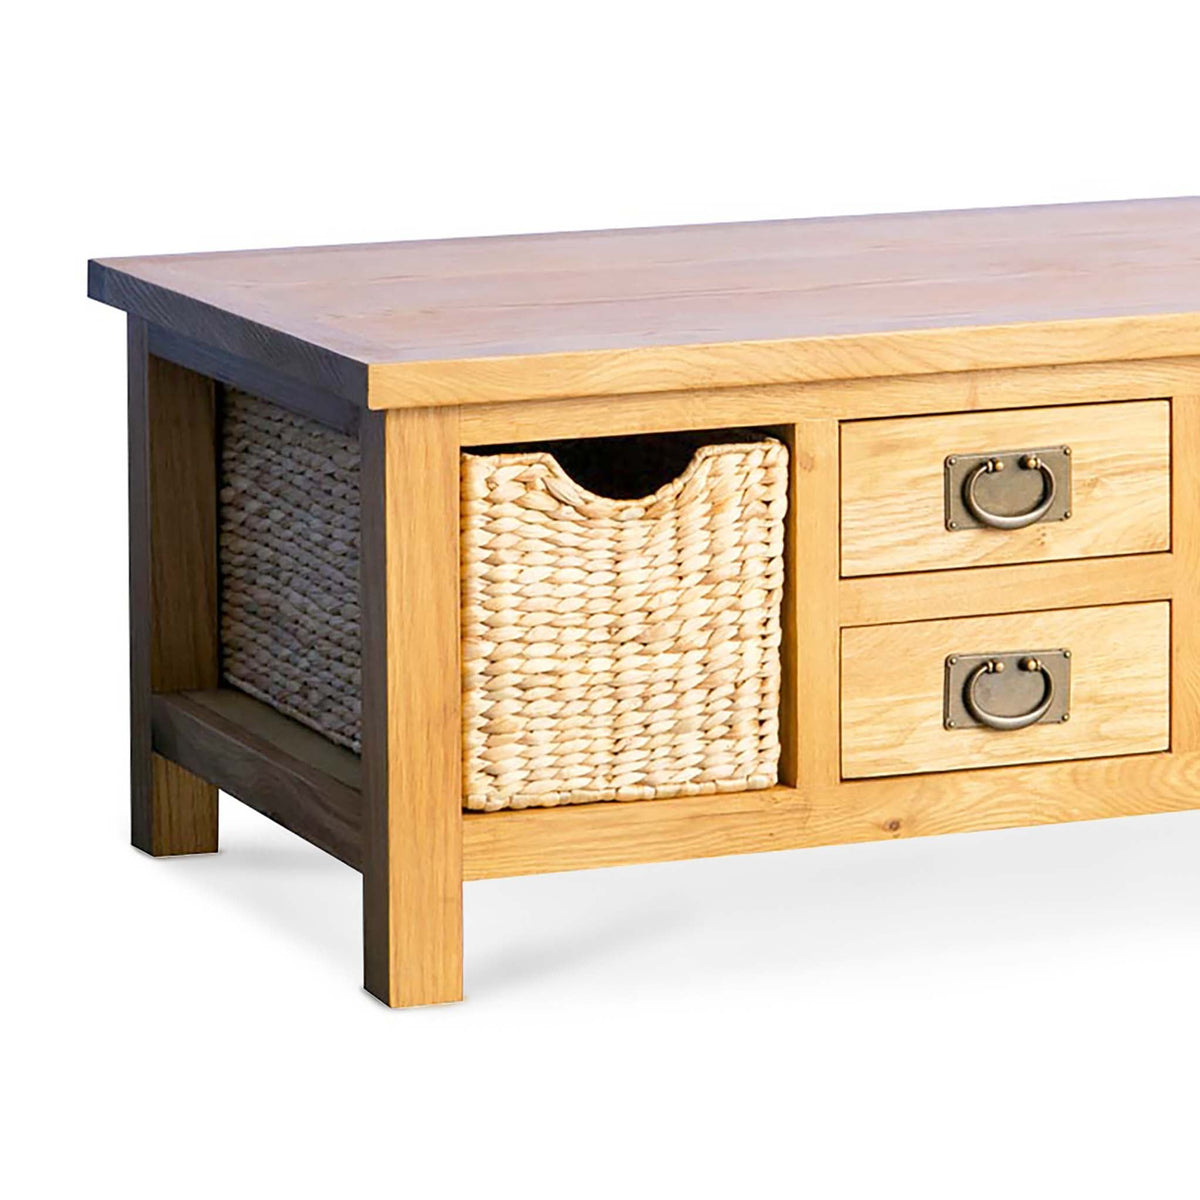 Surrey Oak Coffee Table with Baskets